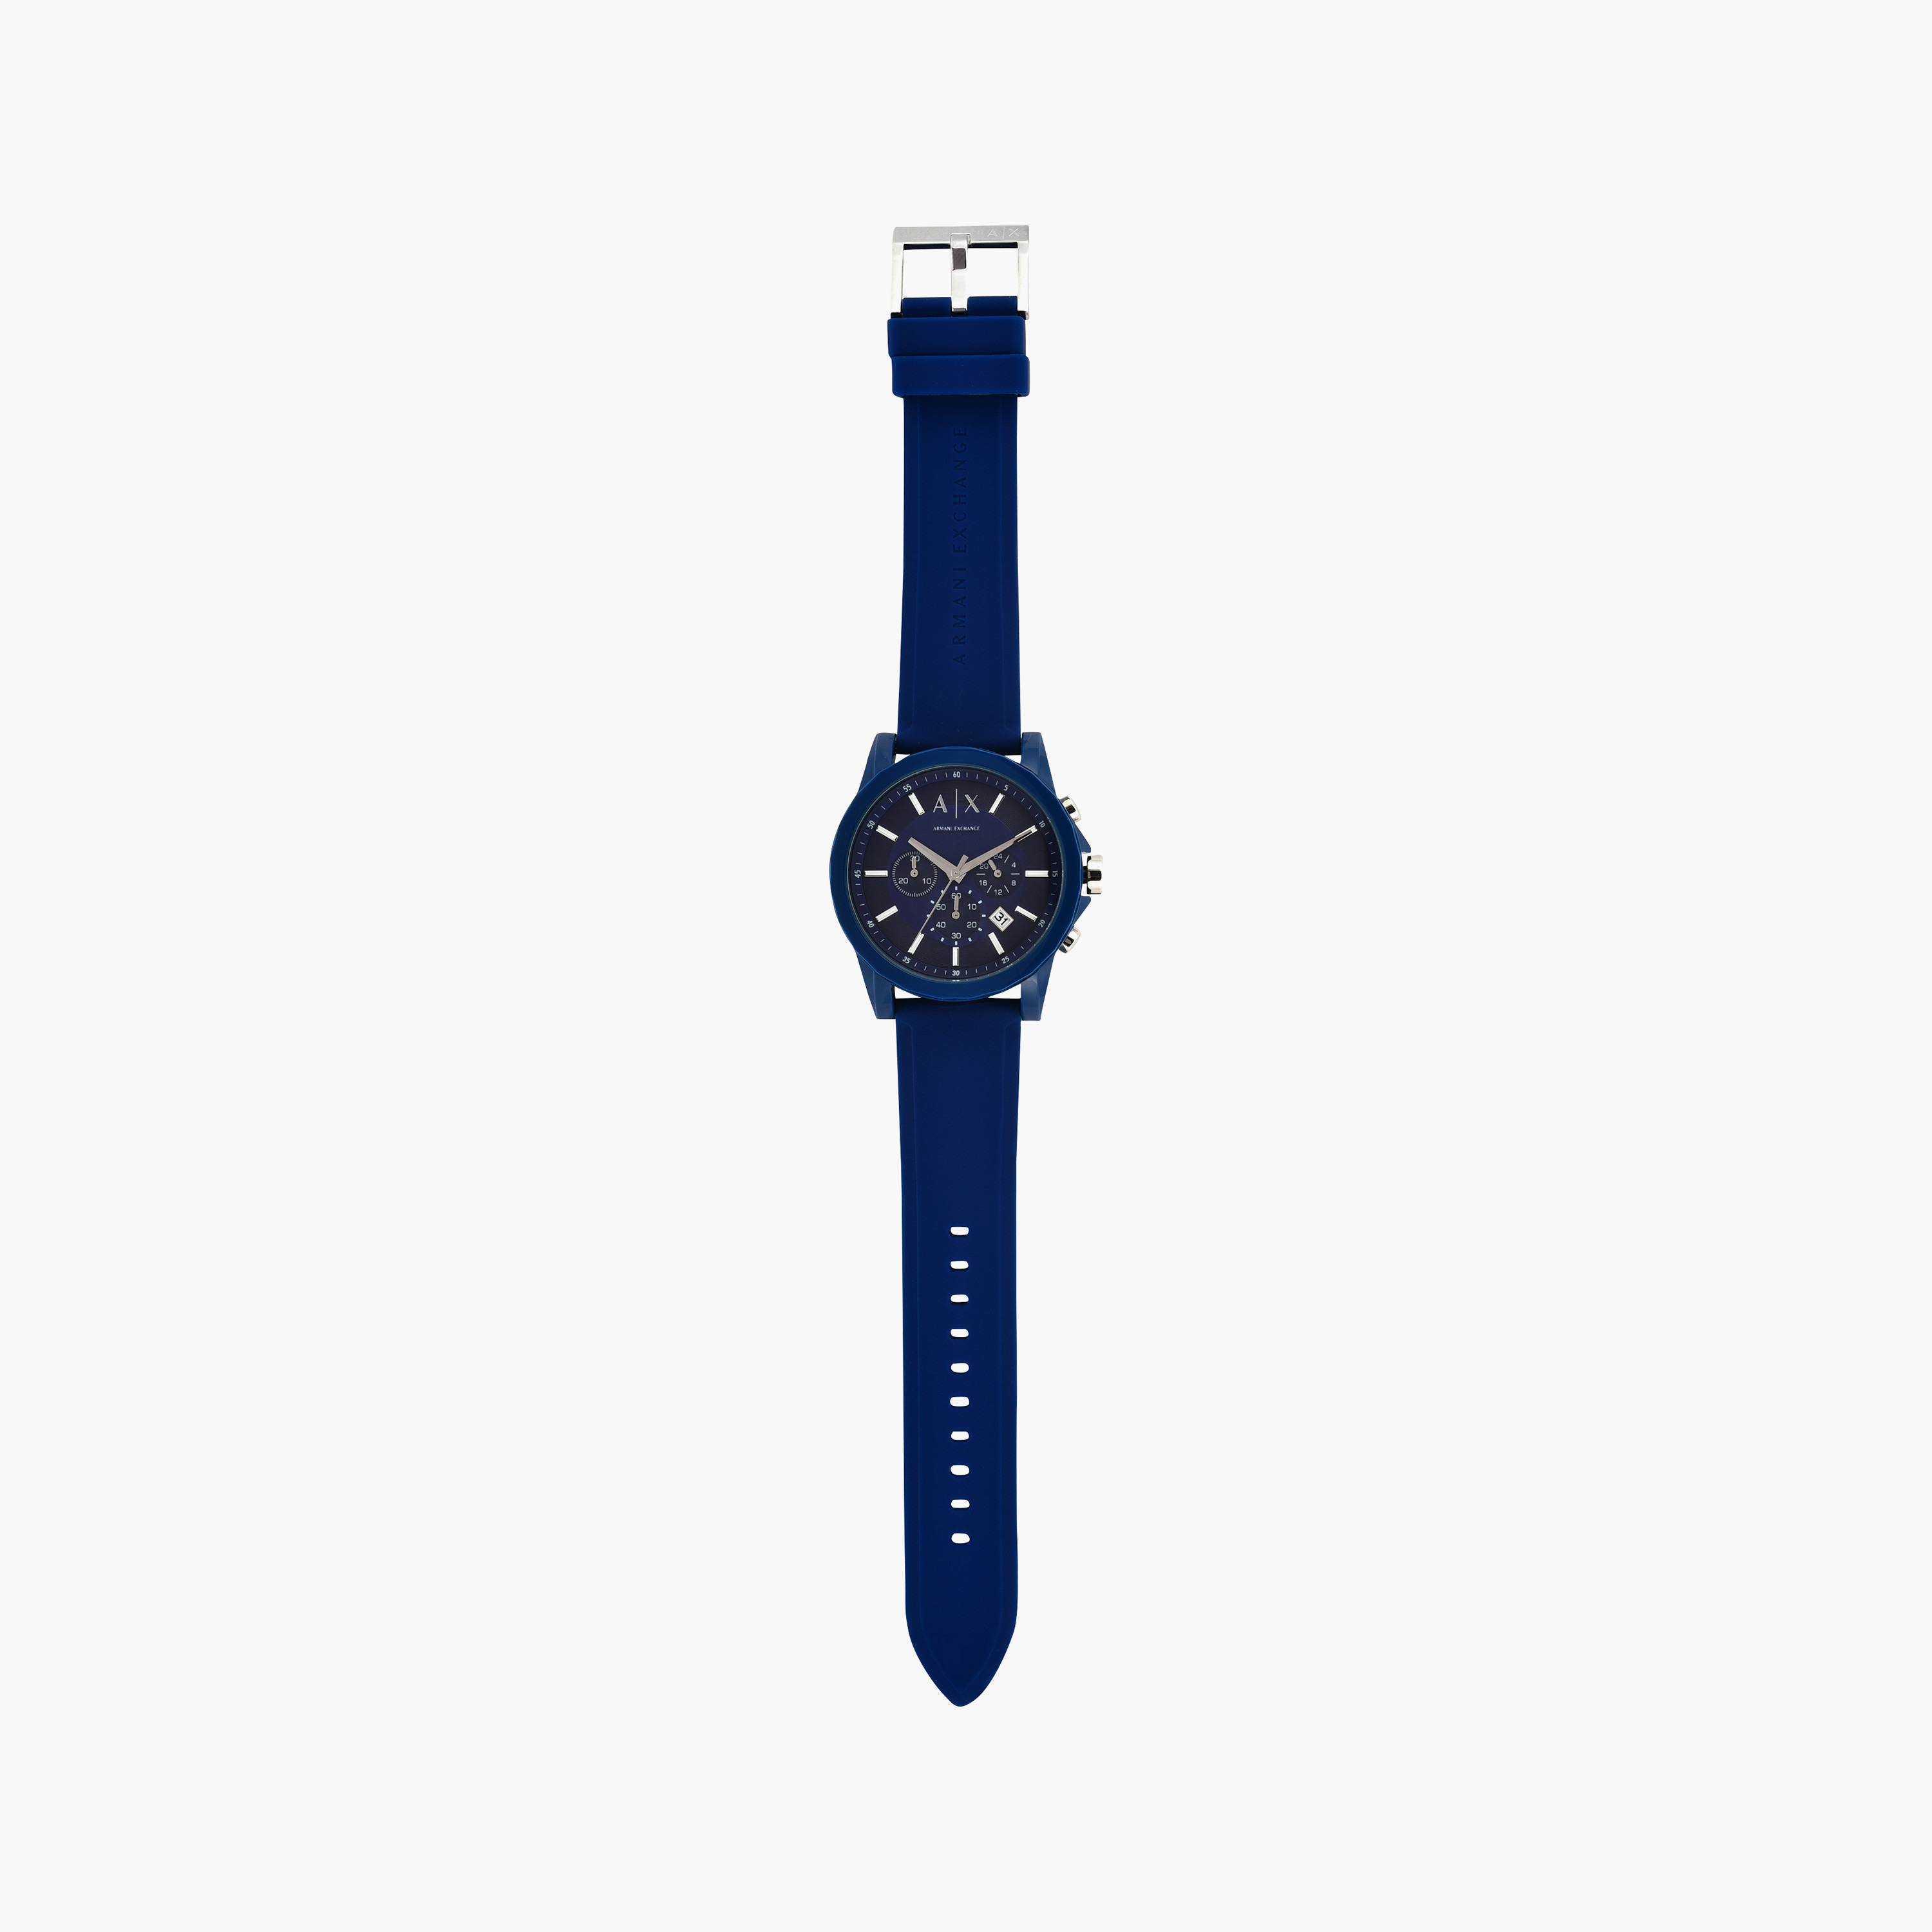 ARMANI EXCHANGE Mens Watch Blue Silicone strap Lightweight Chrono NEW Boxed  a9 | eBay